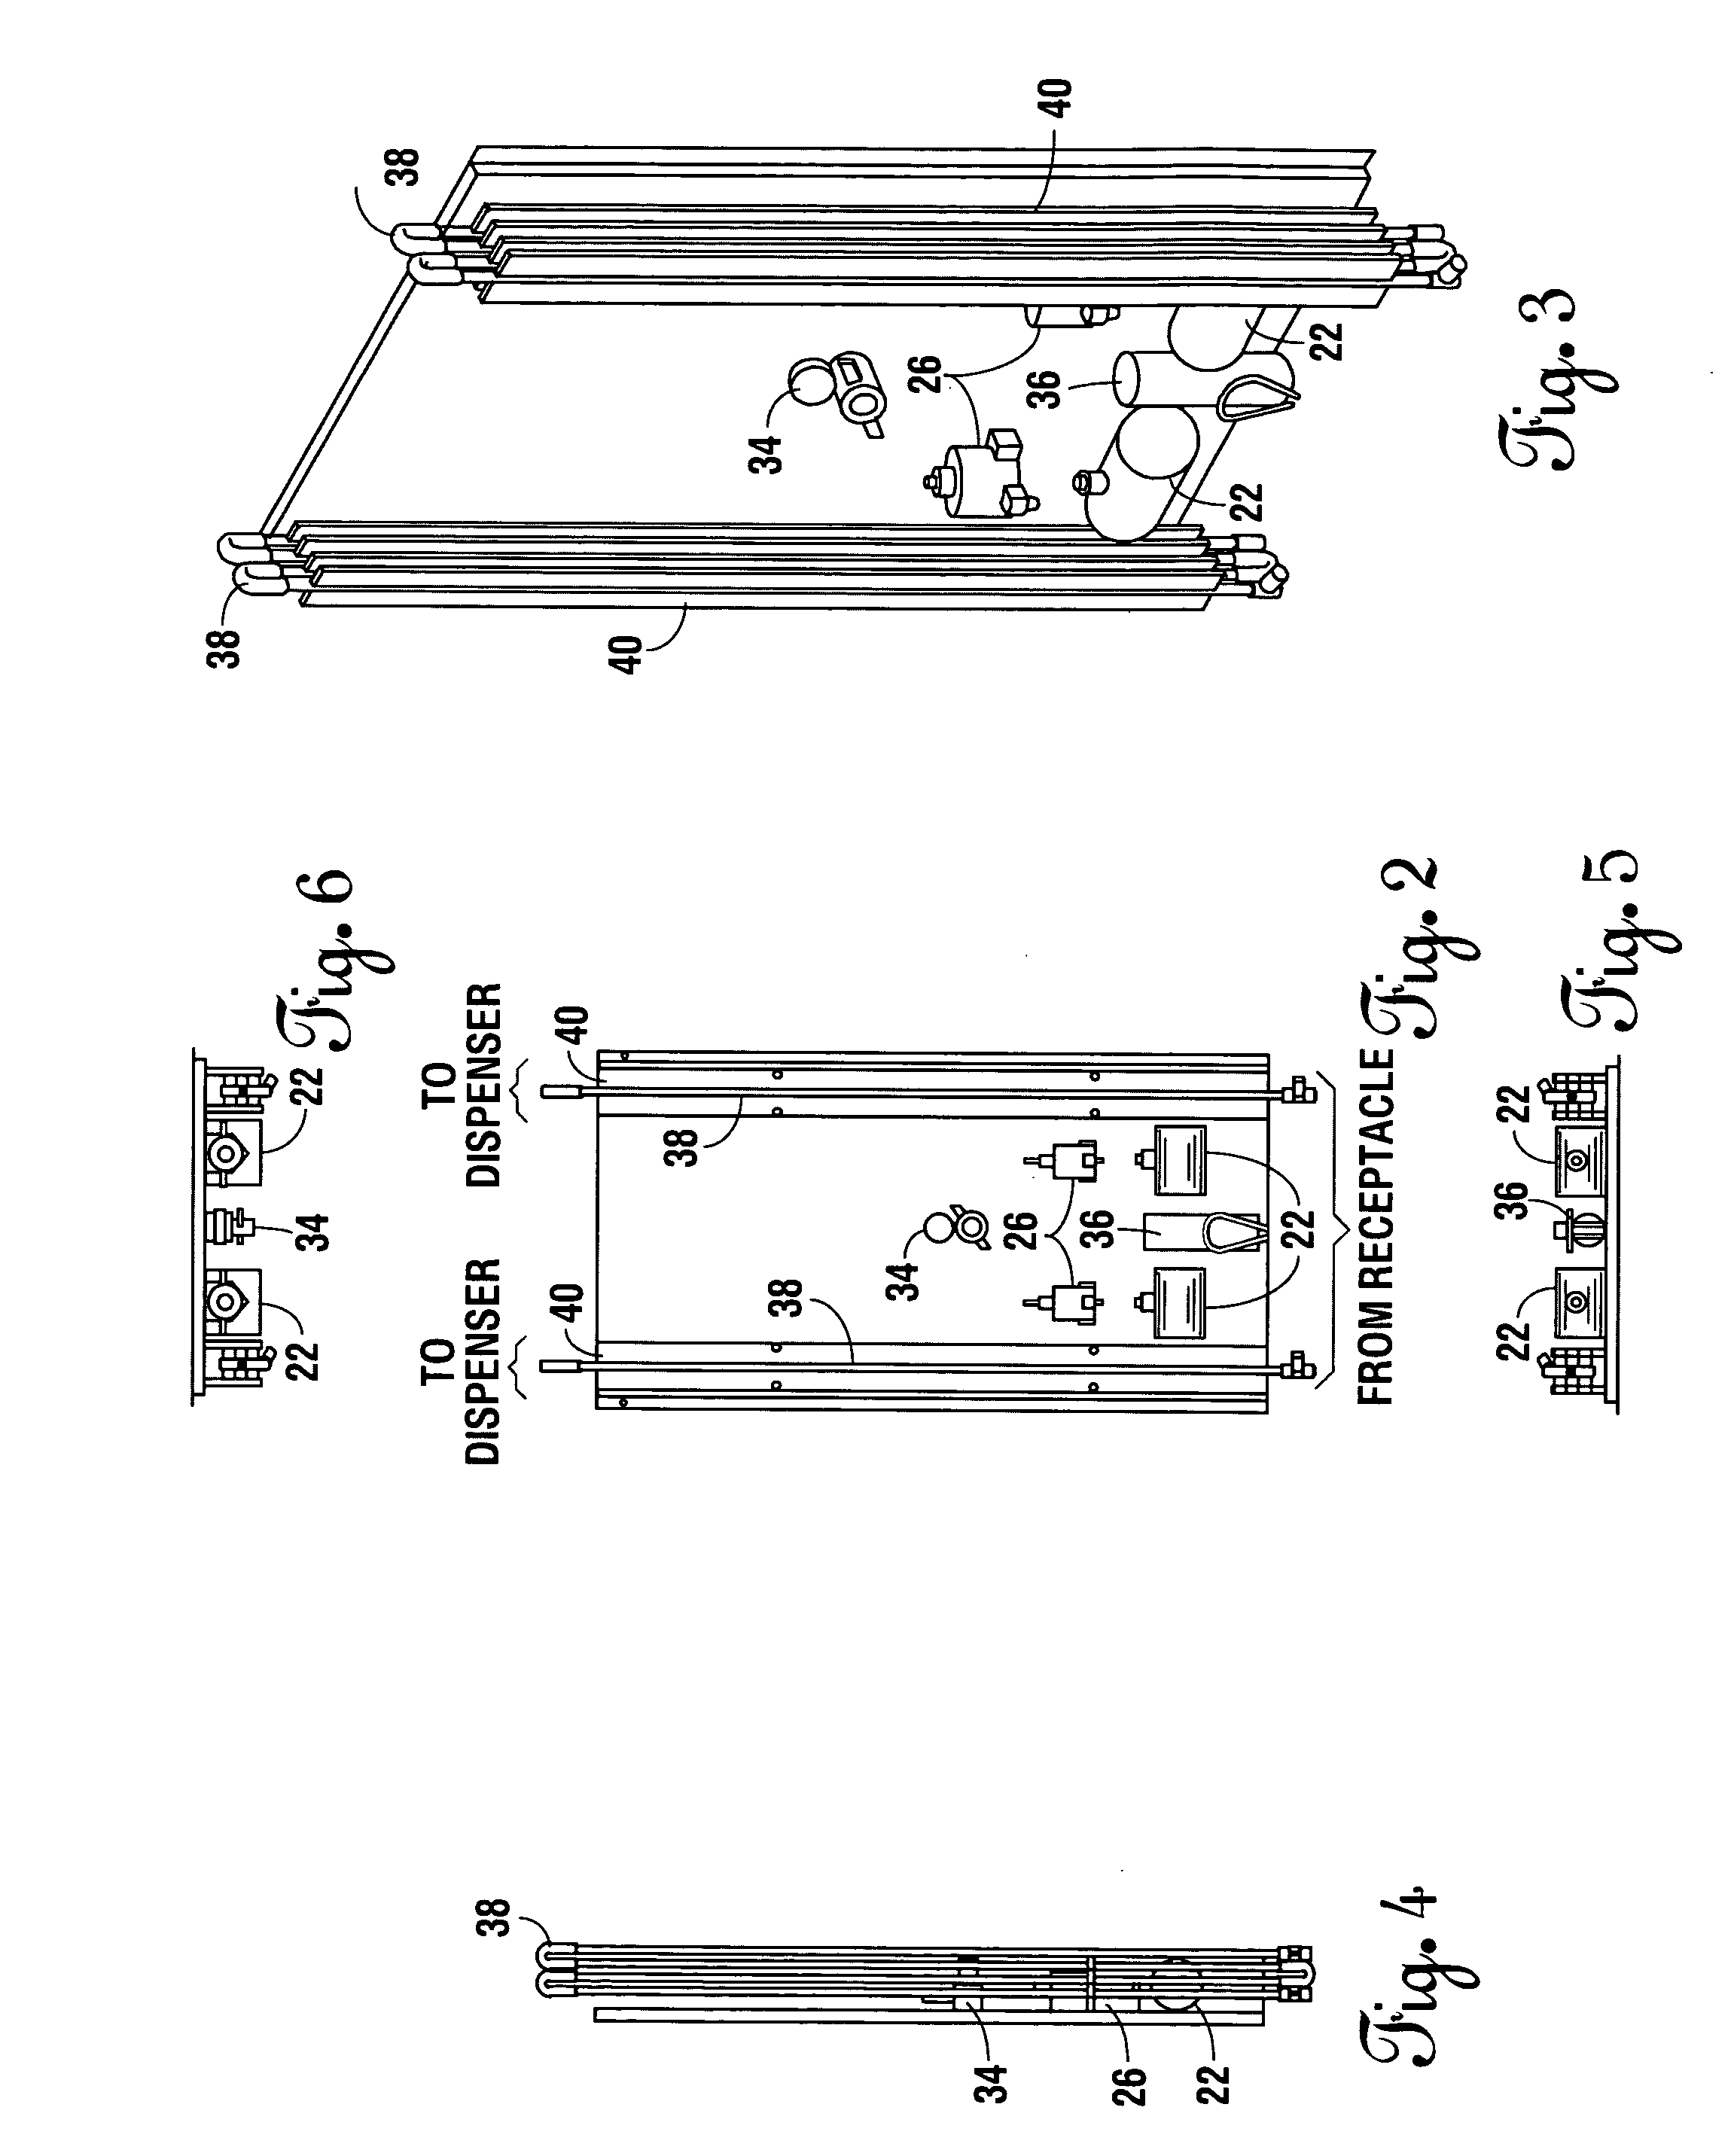 Method for the production of tea beverages and other beverages